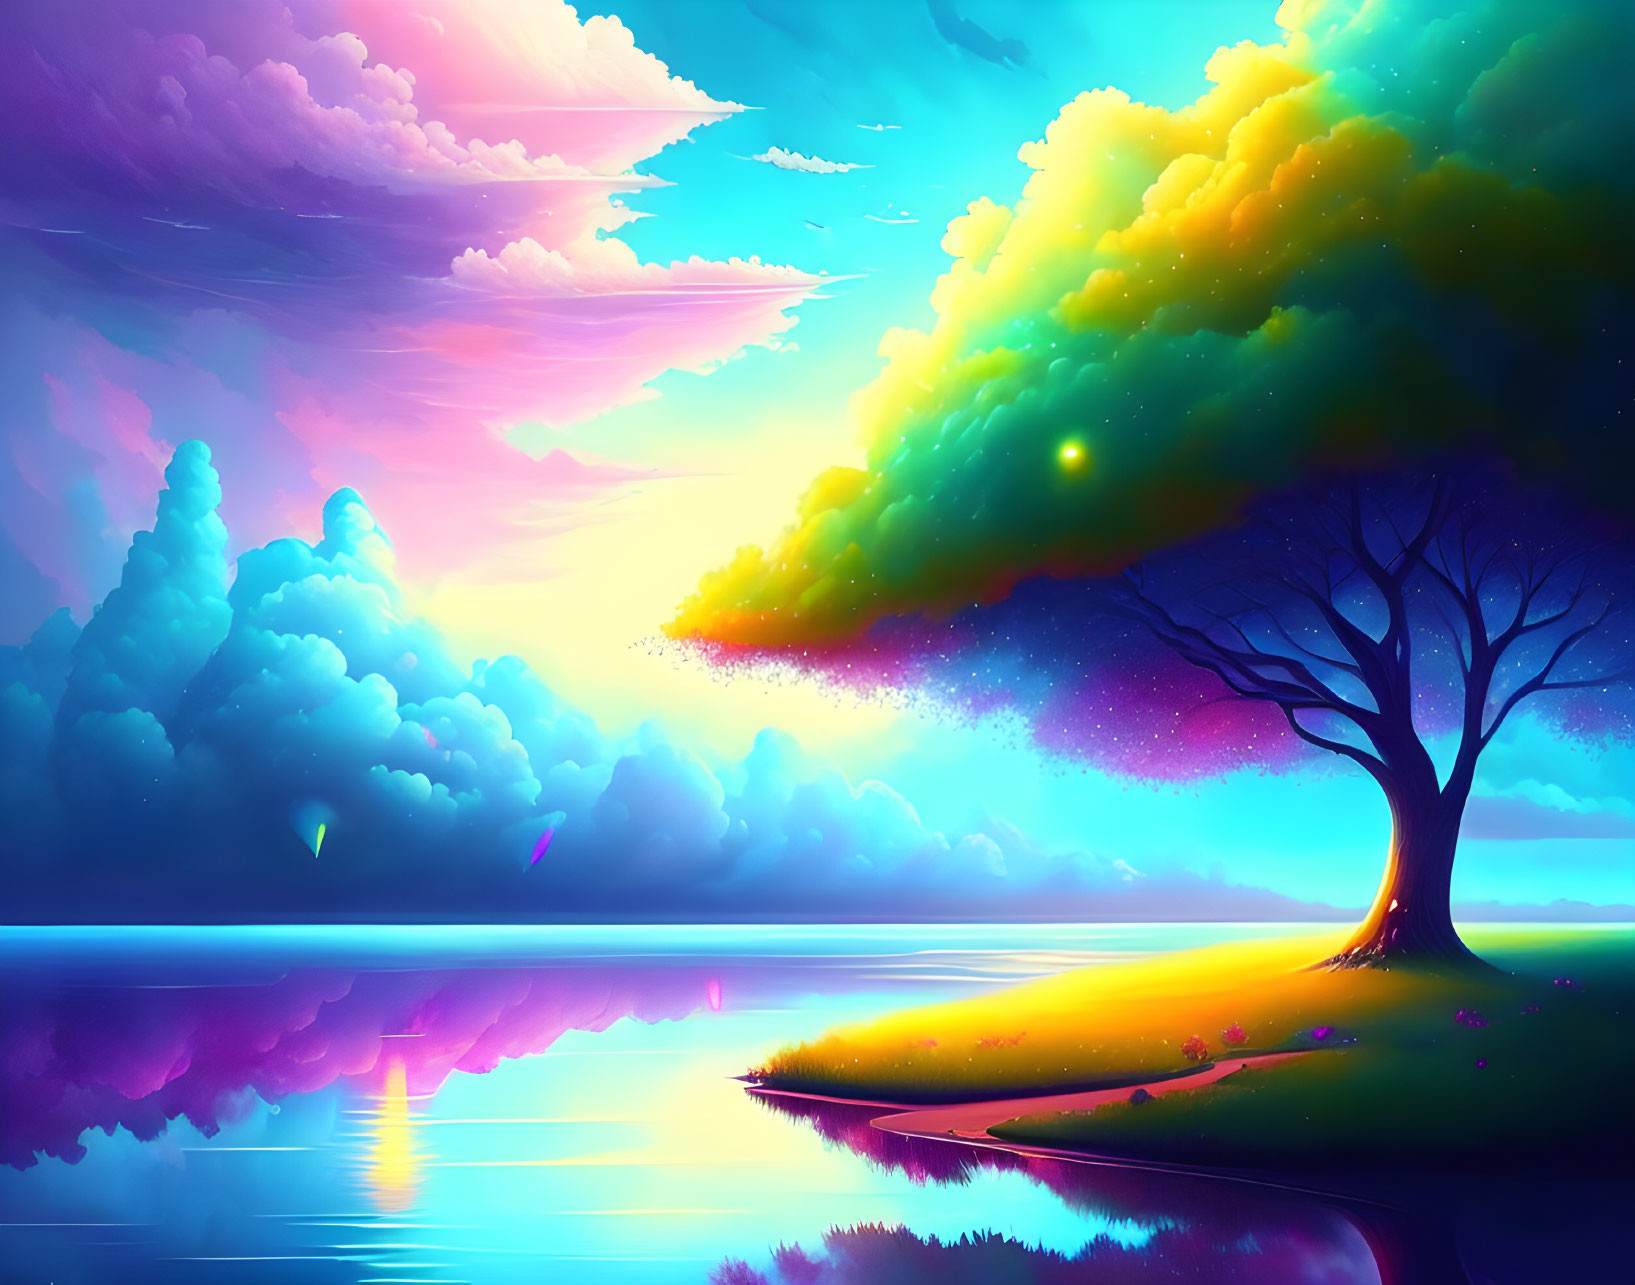 Colorful digital artwork of serene landscape with lone tree, reflective water, and surreal sky